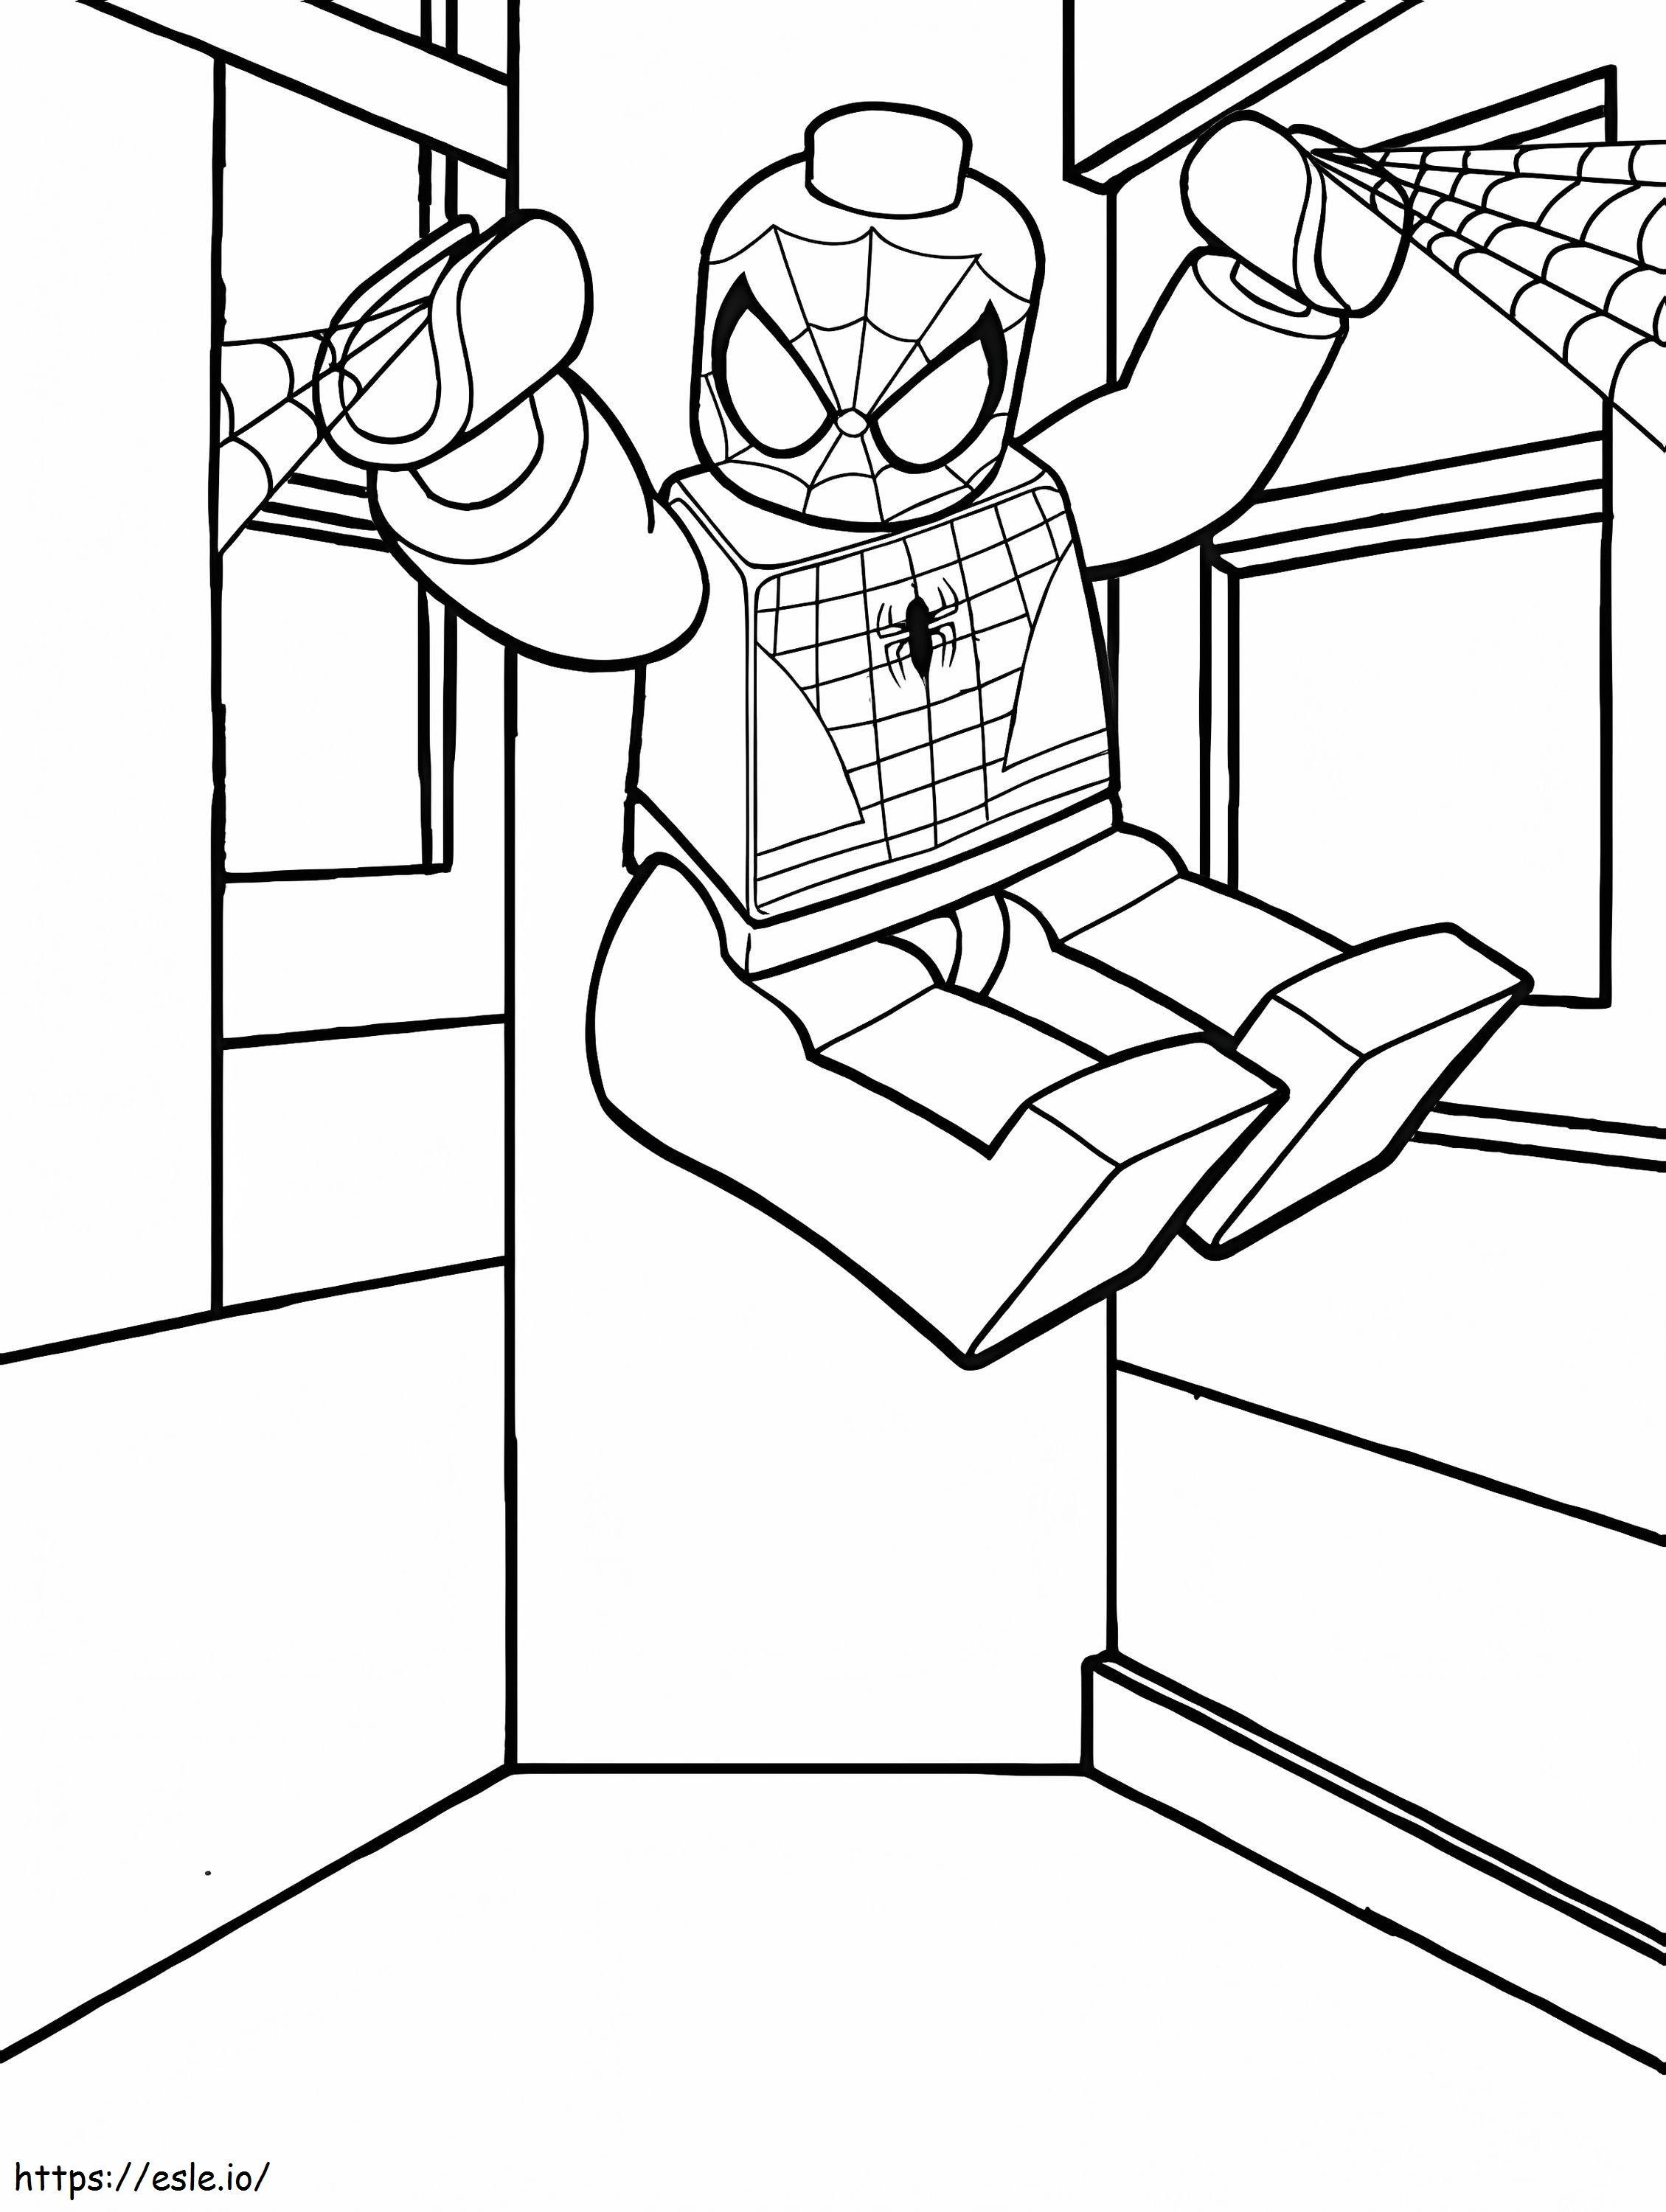 Cool Lego Spider Man coloring page